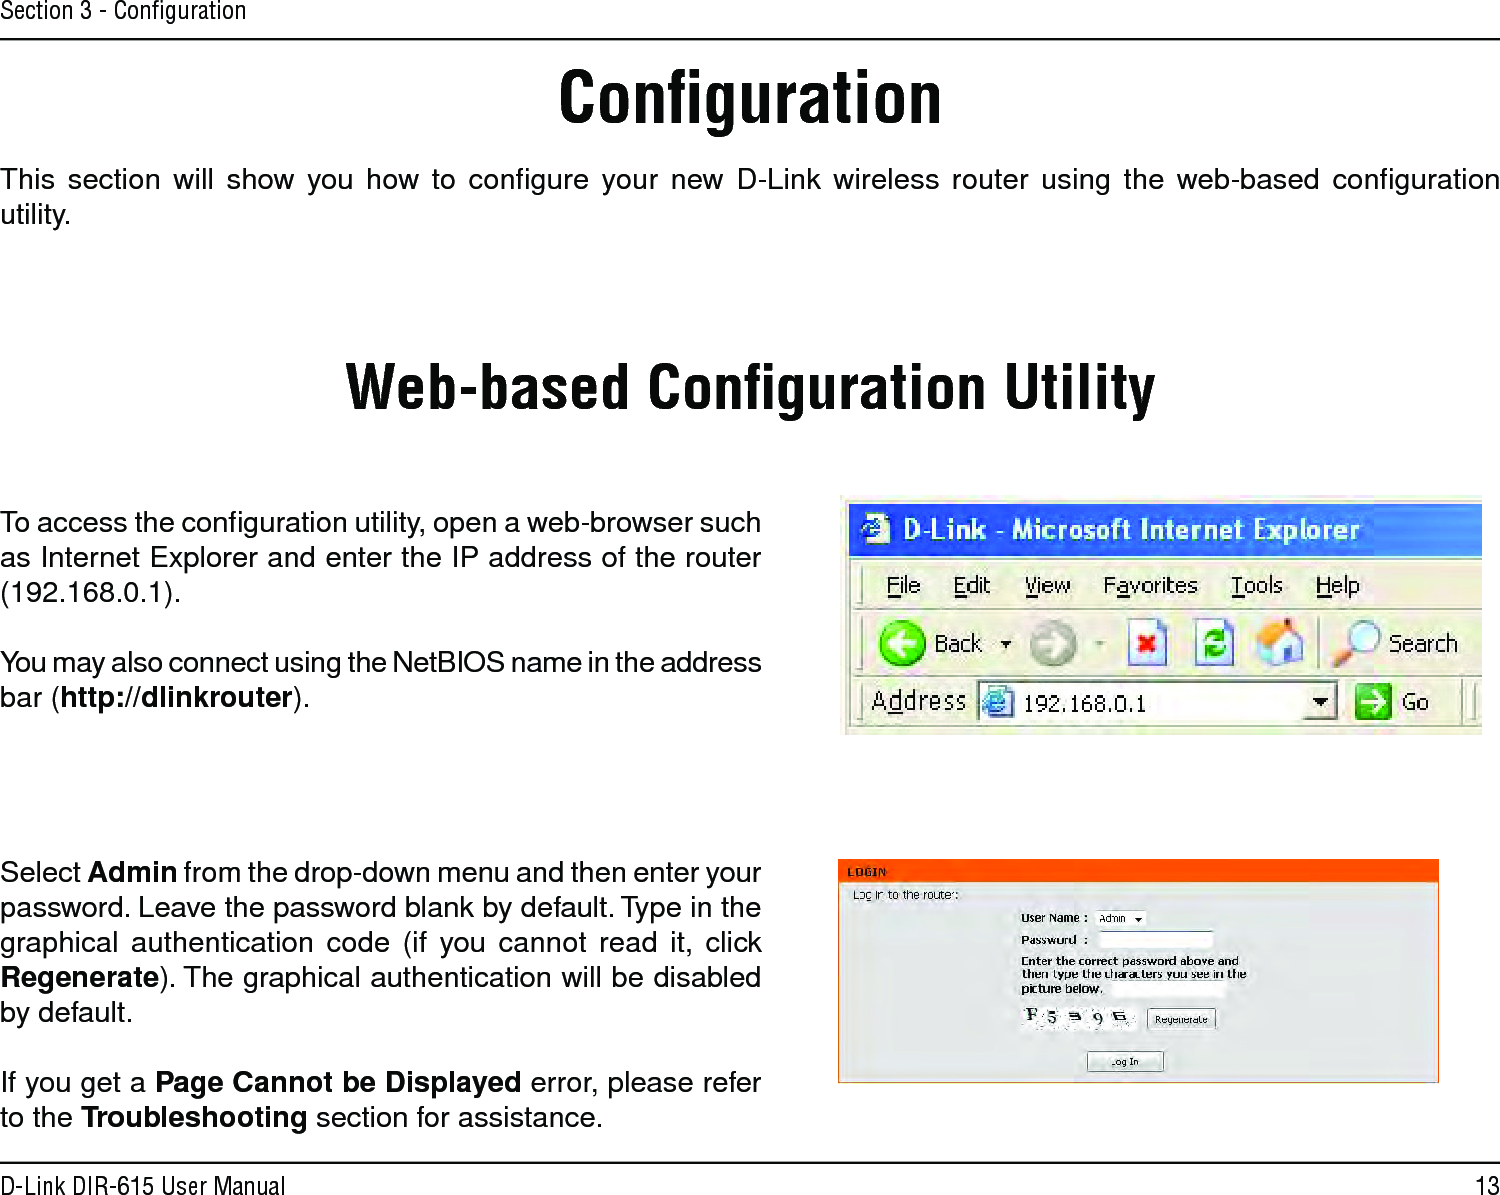 13D-Link DIR-615 User ManualSection 3 - ConﬁgurationConﬁgurationThis  section  will  show  you  how  to  conﬁgure  your  new  D-Link  wireless  router  using  the  web-based  conﬁguration utility.Web-based Conﬁguration UtilityTo access the conﬁguration utility, open a web-browser such as Internet Explorer and enter the IP address of the router (192.168.0.1).You may also connect using the NetBIOS name in the address bar (http://dlinkrouter).Select Admin from the drop-down menu and then enter your password. Leave the password blank by default. Type in the graphical  authentication  code  (if  you  cannot  read  it,  click Regenerate). The graphical authentication will be disabled by default.If you get a Page Cannot be Displayed error, please refer to the Troubleshooting section for assistance.